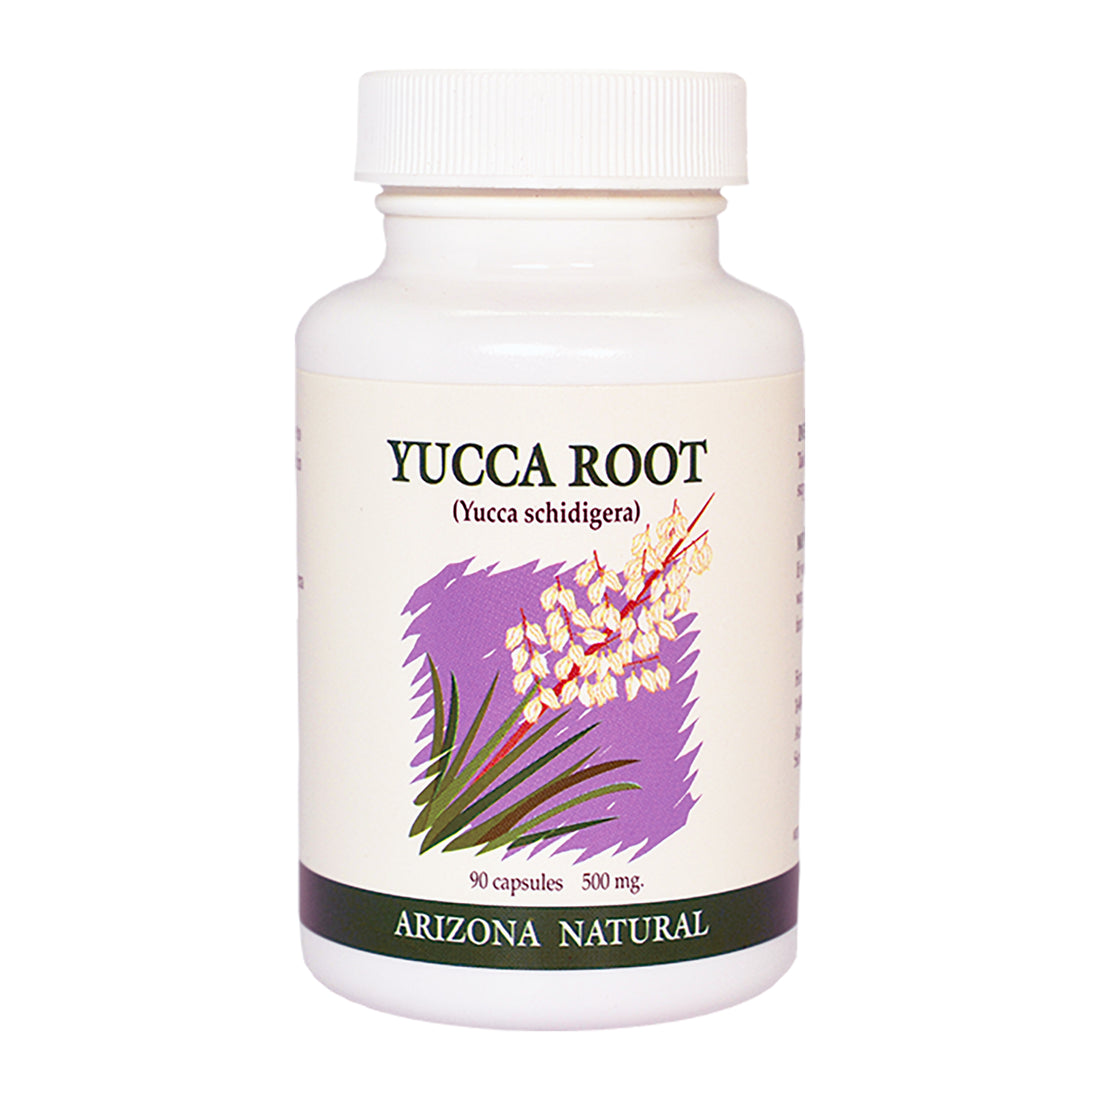 The Health Benefits of Yucca